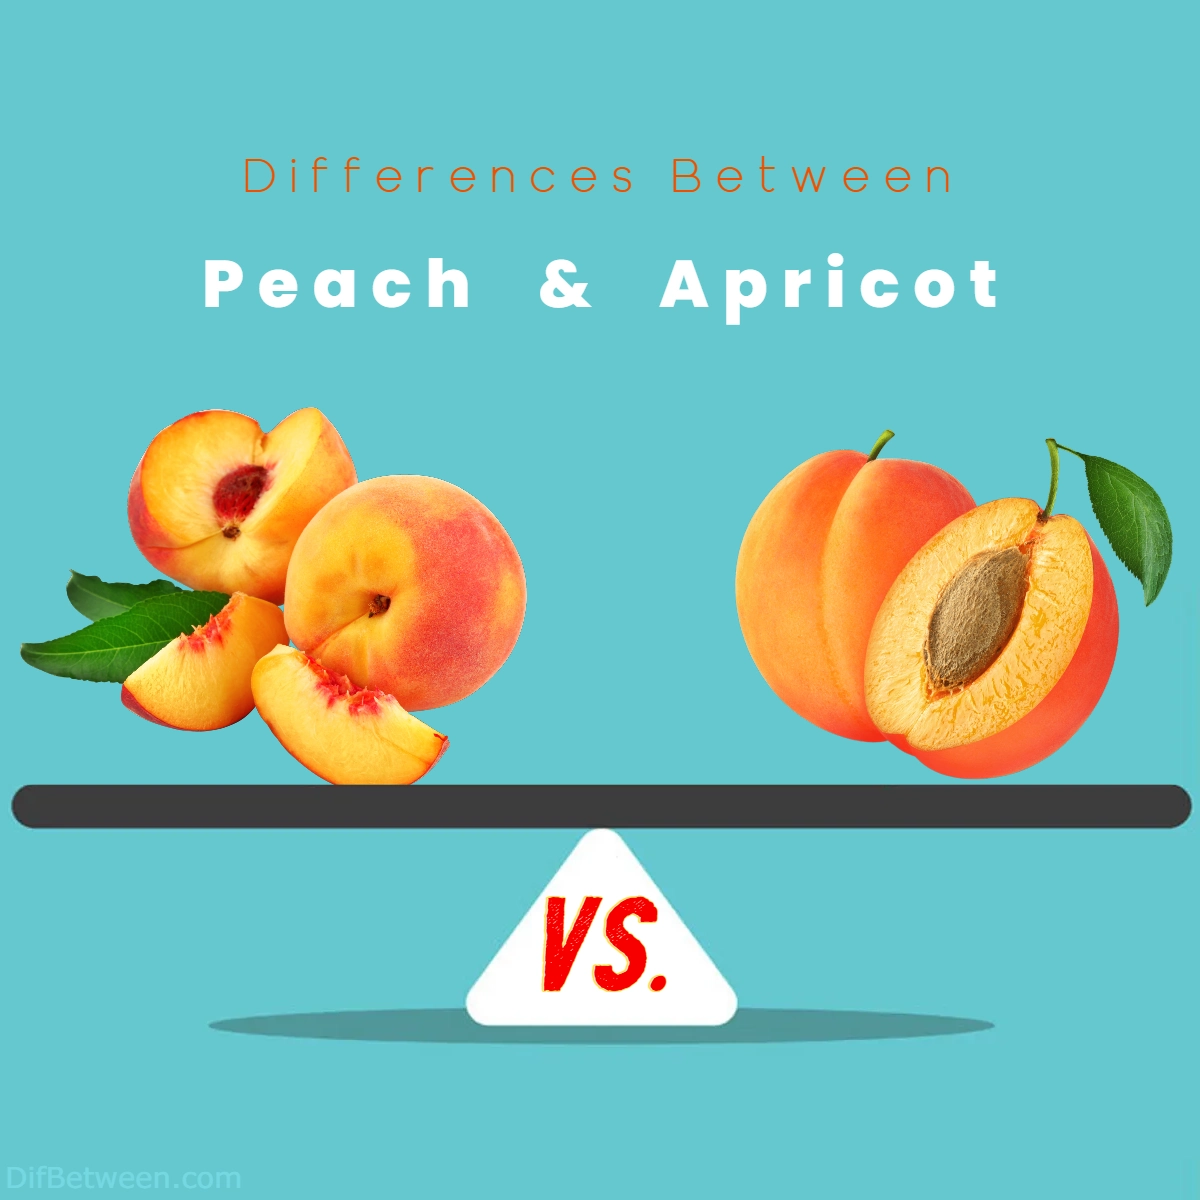 Difference Between Peach and Apricot